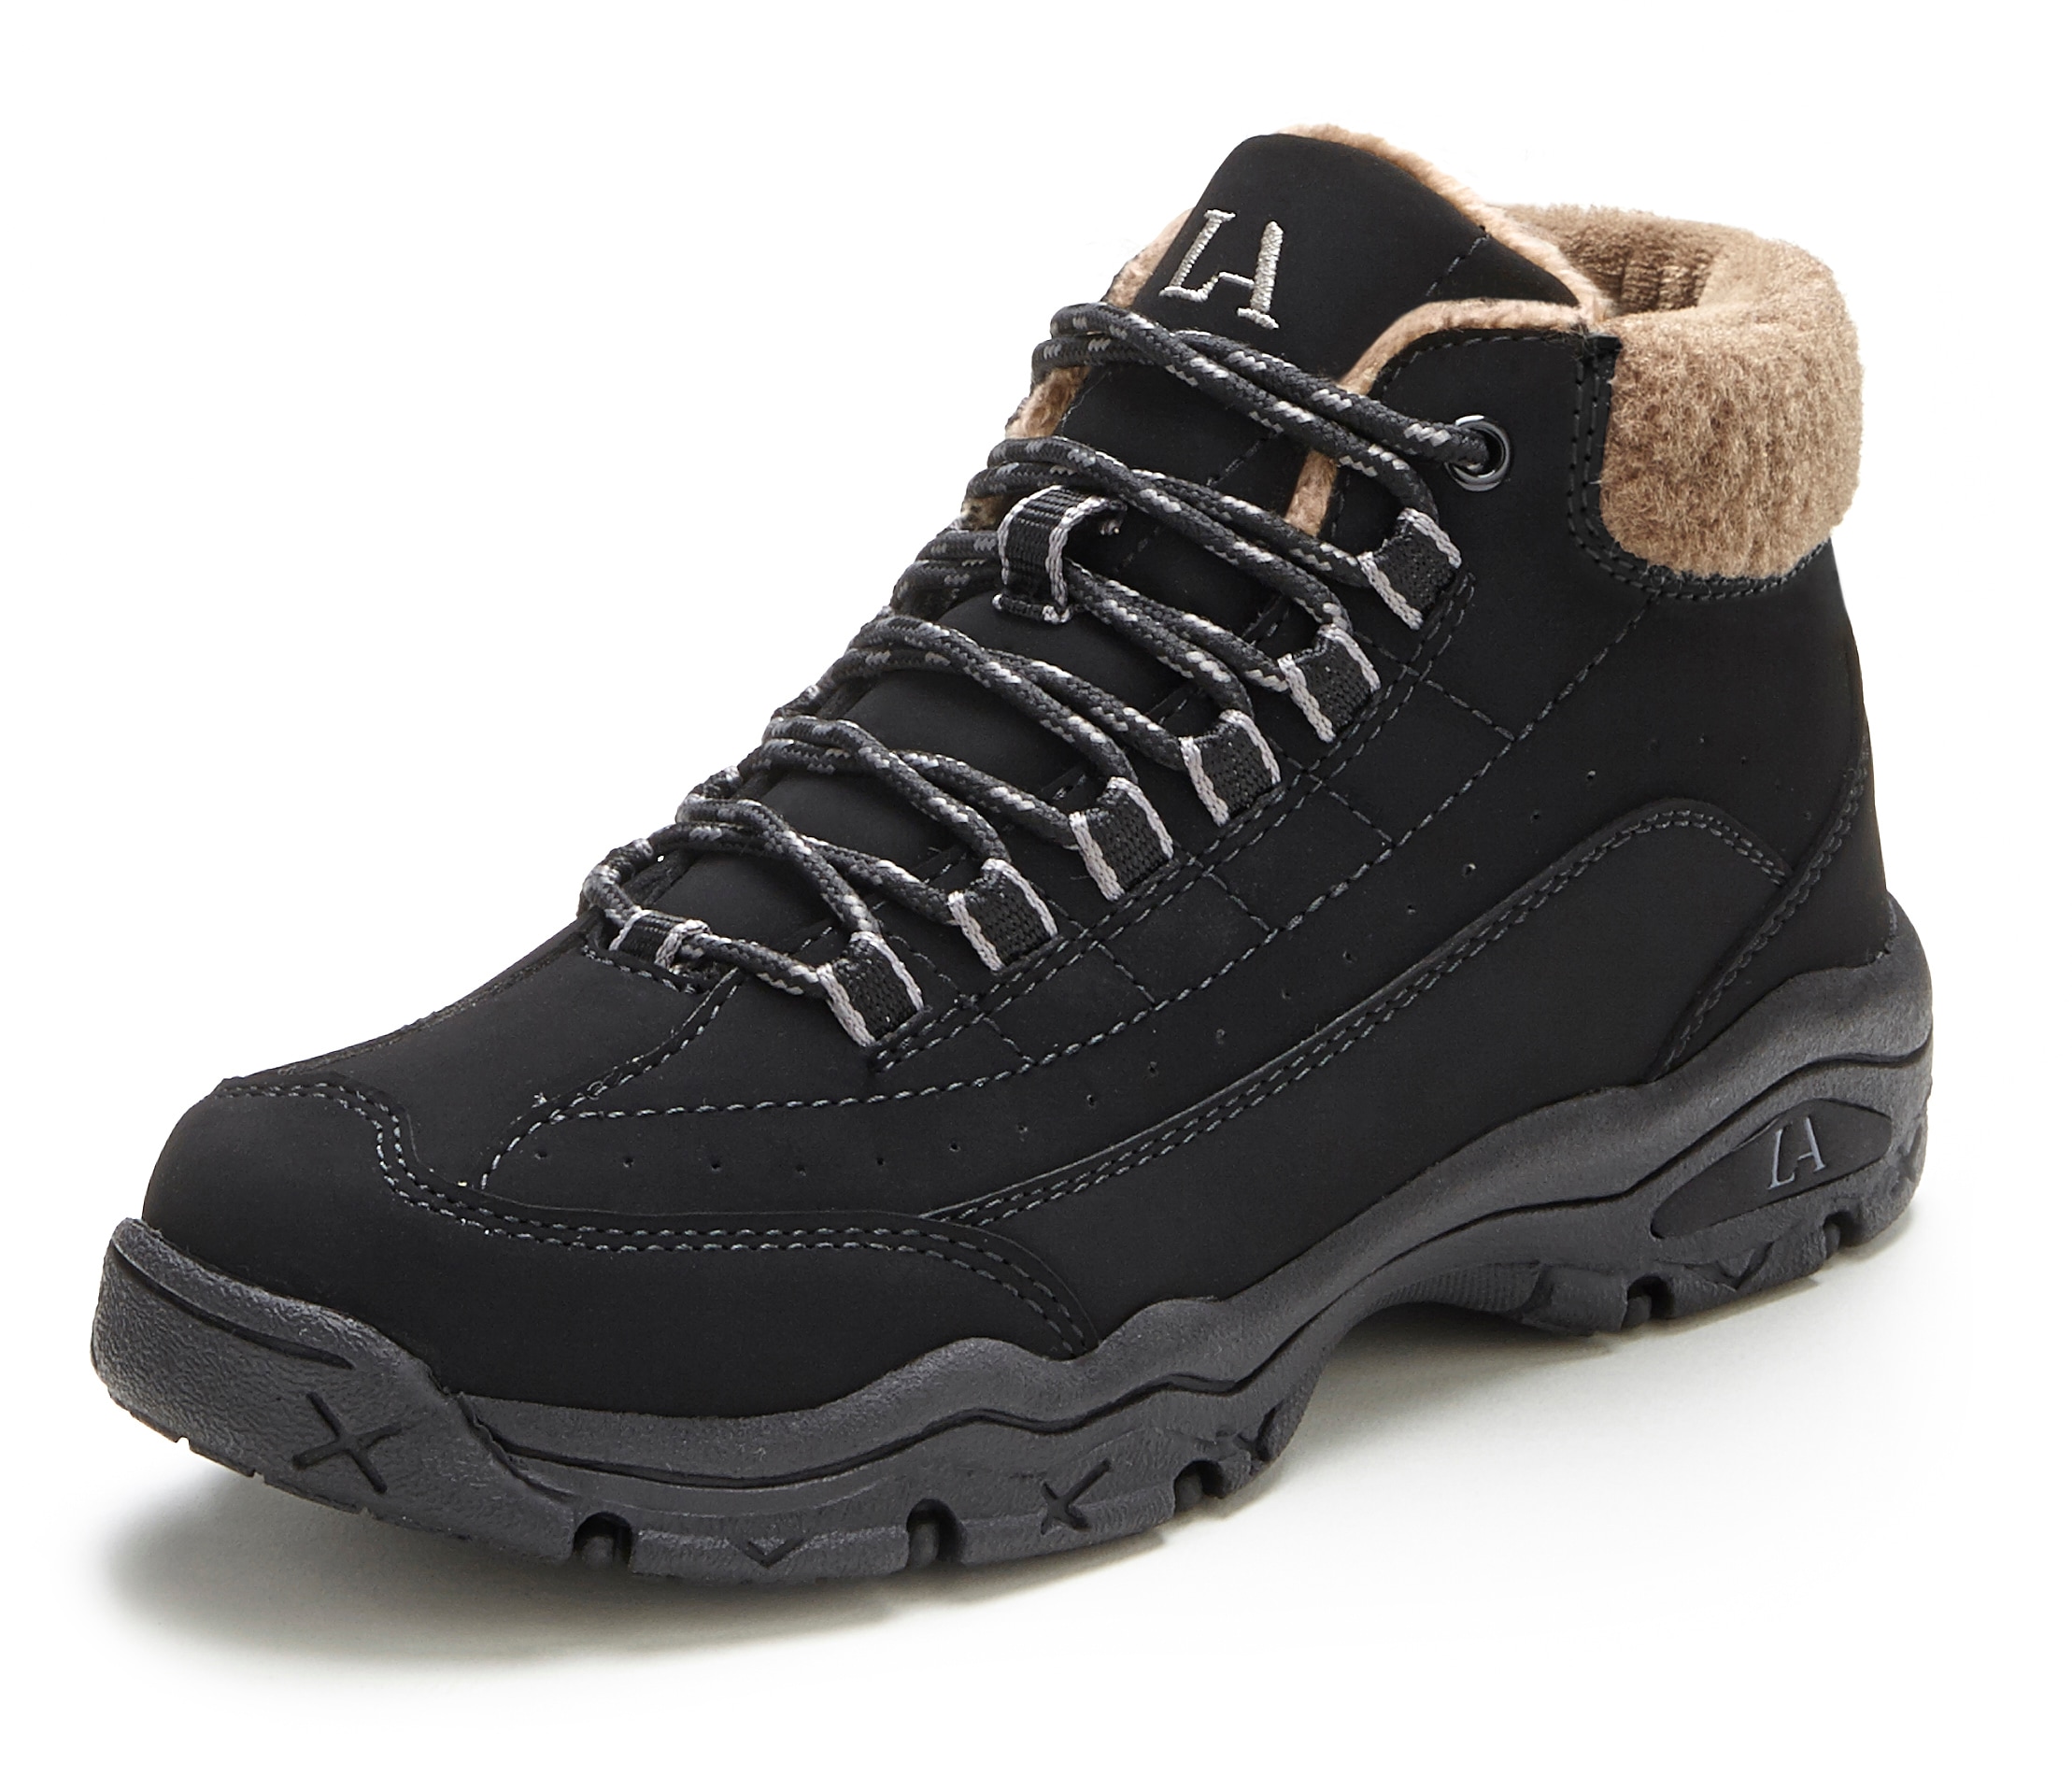 Winterstiefelette, mit robuster Sohle, kuscheliges Warmfutter,Outdoor Boots,Ankle Sneaker